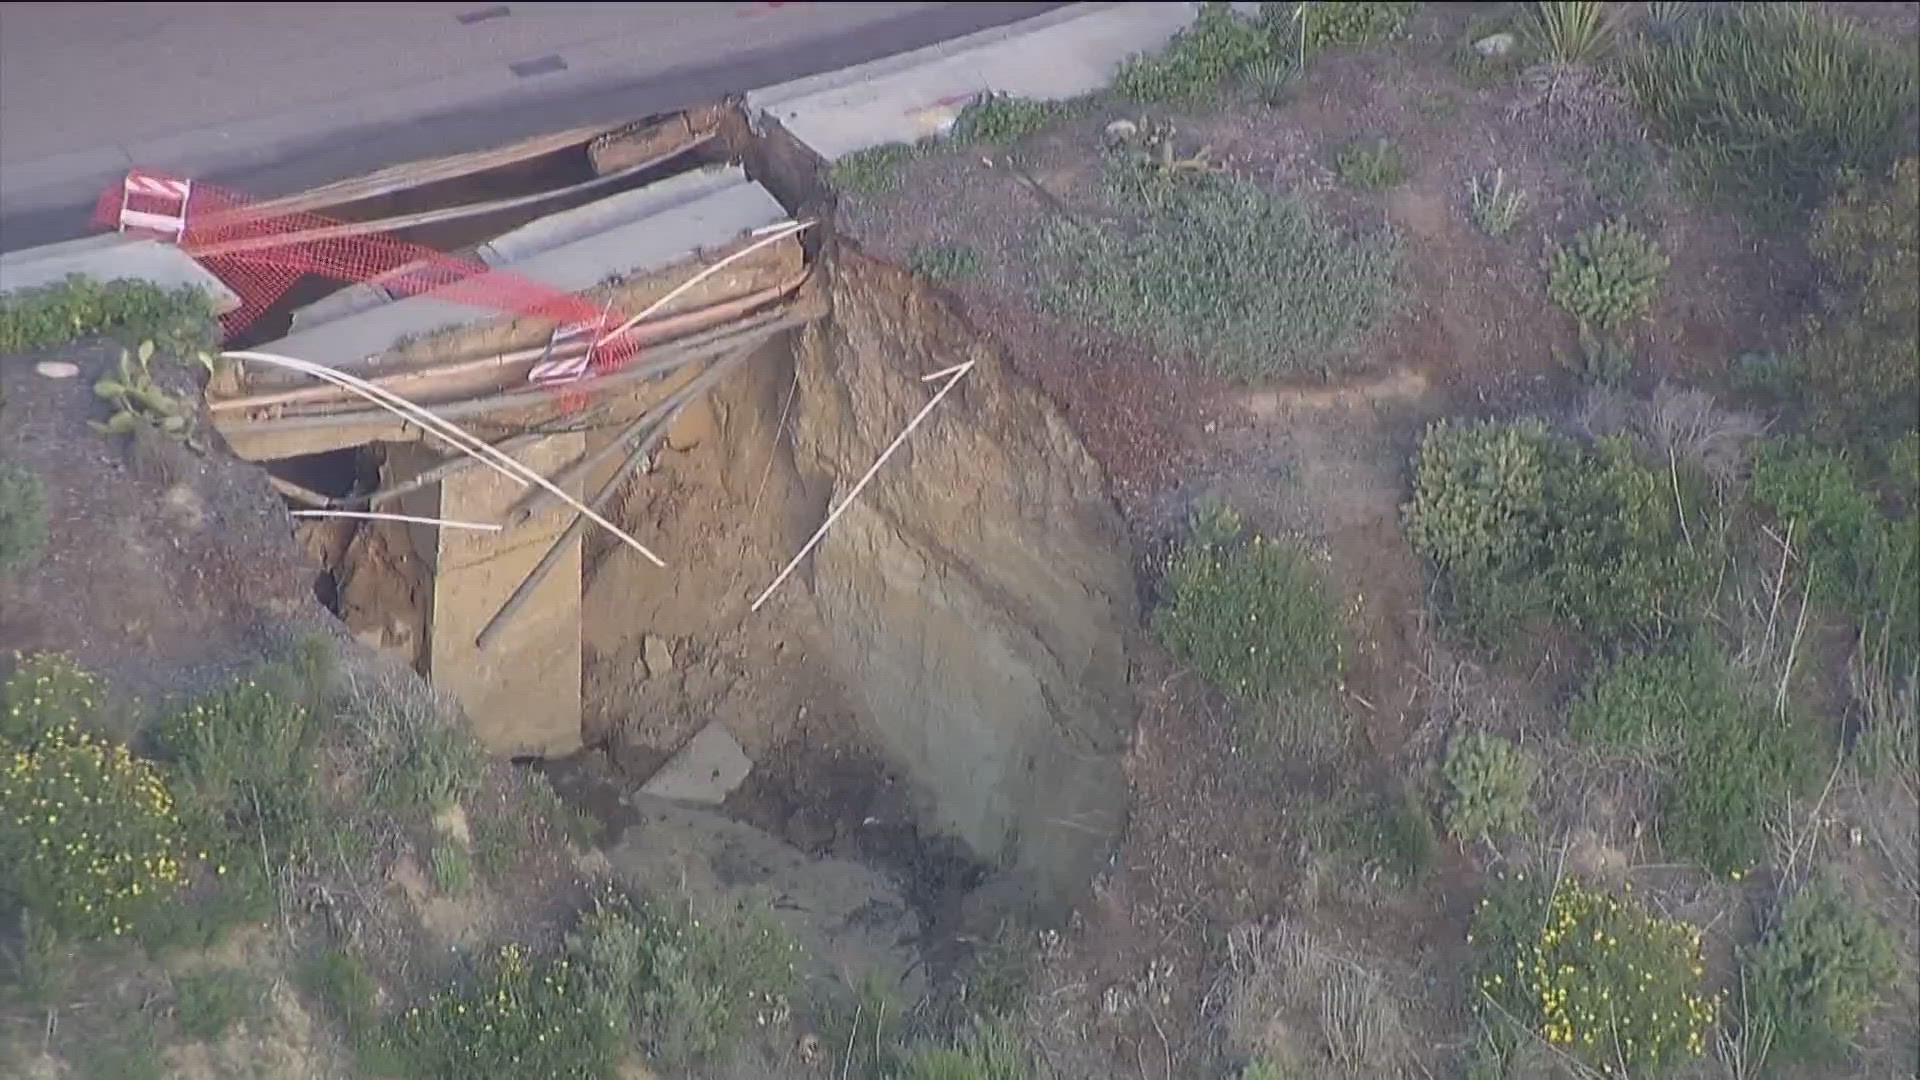 CBS 8 checked in with the City of Encinitas and City of San Diego to learn how sinkhole repair work is going.